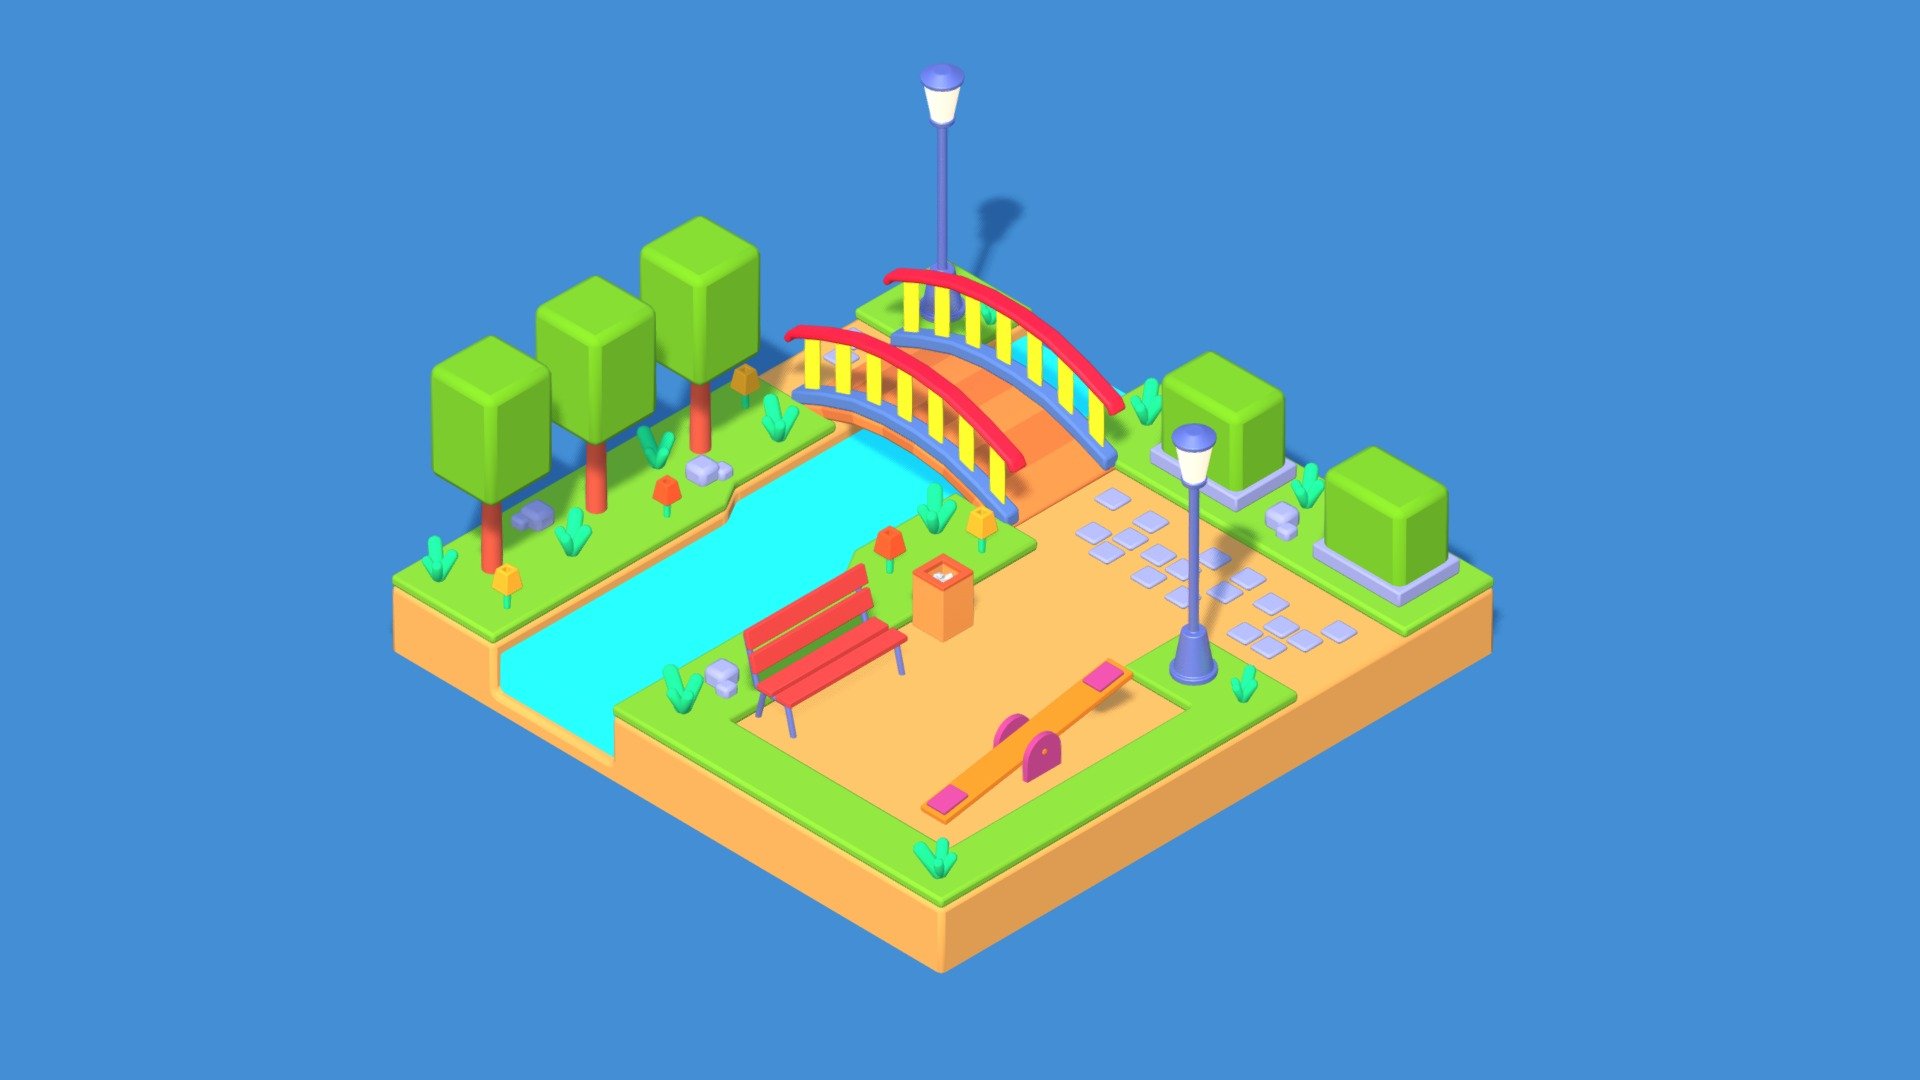 https://www.artstation.com/artwork/0nlWXE



Inspired in Walk in the Park by @polygonrunway

• https://youtu.be/Ica0yGG1thE - Low Poly Park 🌷 - Buy Royalty Free 3D model by Garu Games (@garugames) 3d model